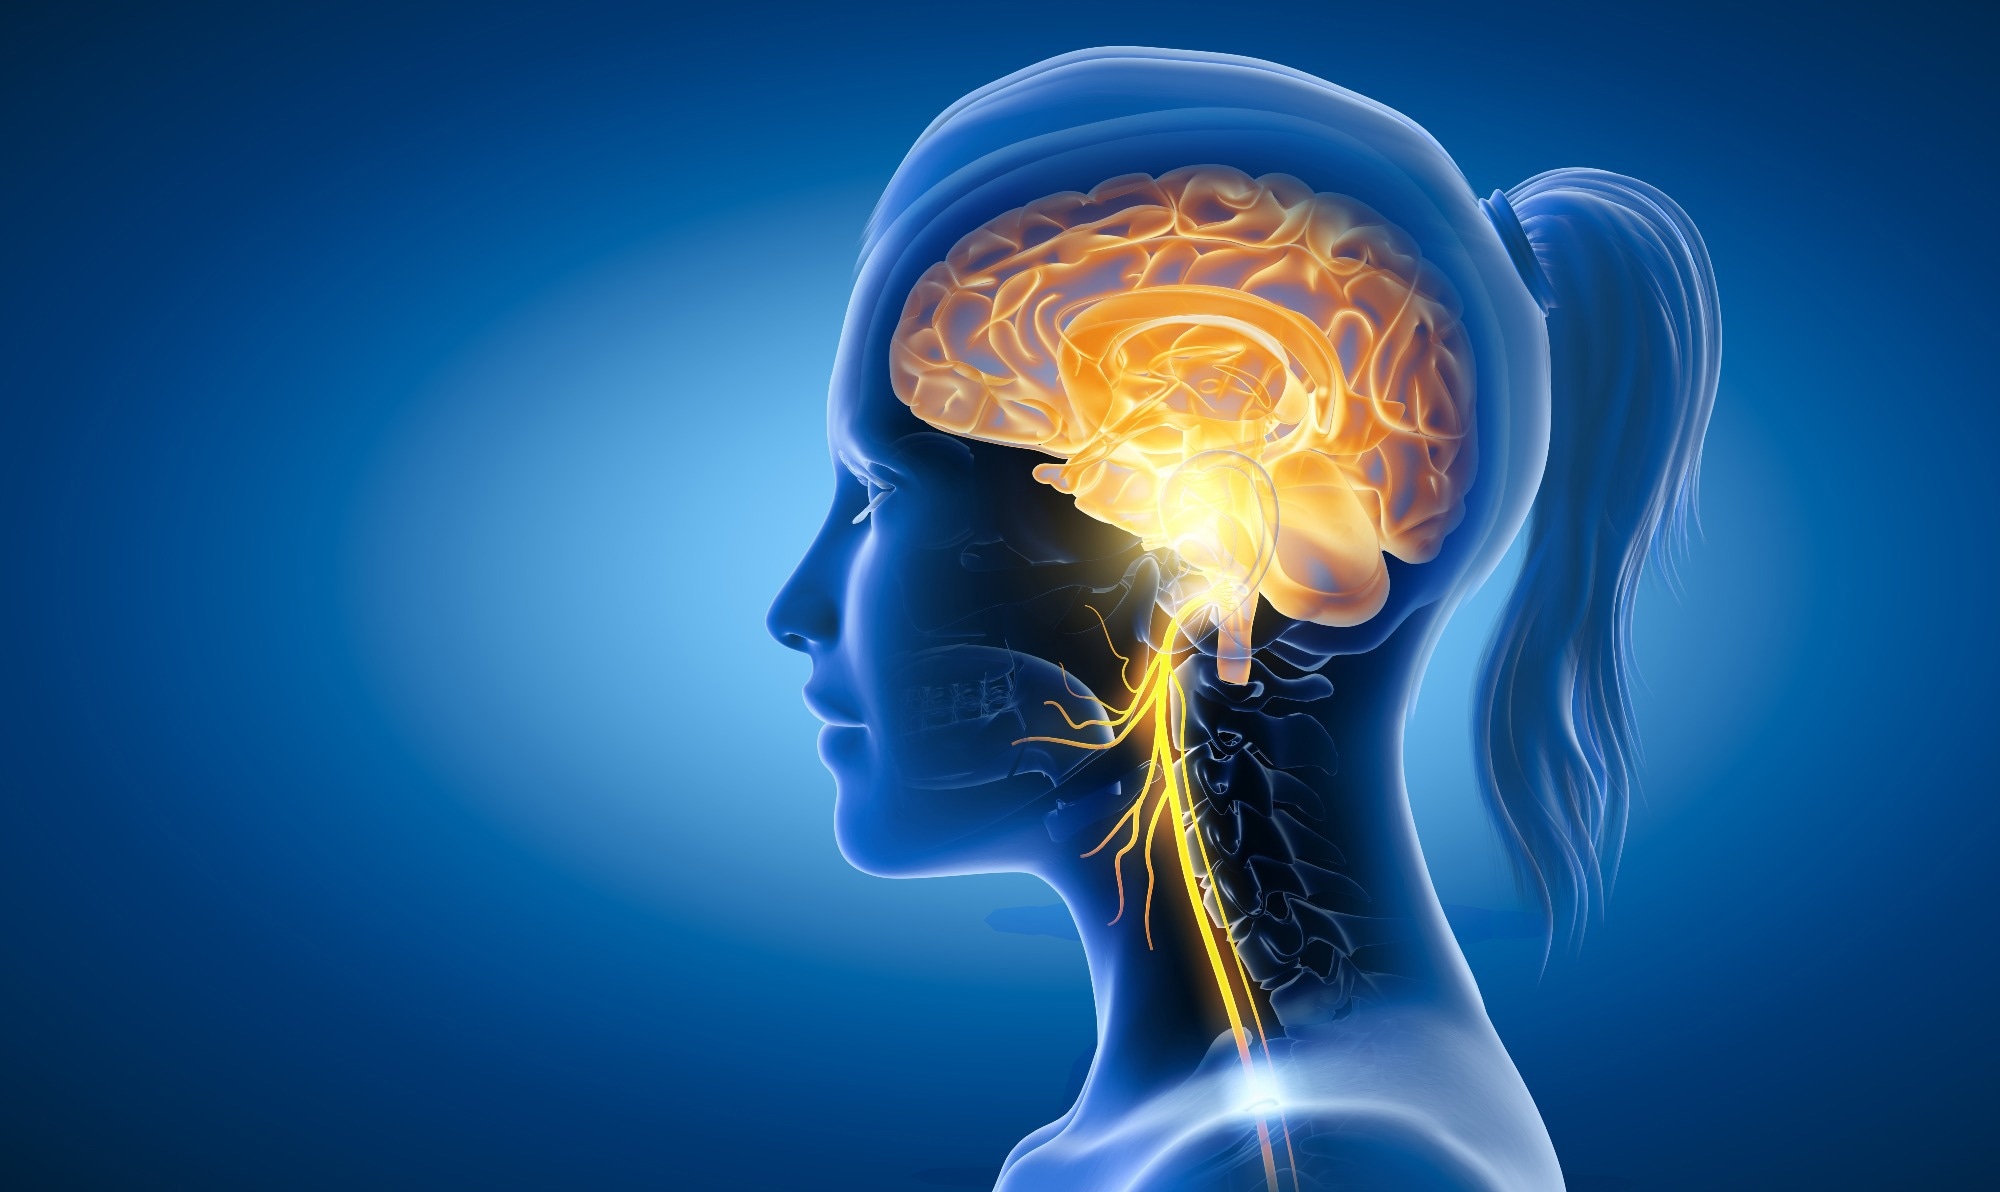 Study: Vagus Nerve Dysfunction in the Post-COVID-19 Condition. Image Credit: Axel_Kock/Shutterstock.com